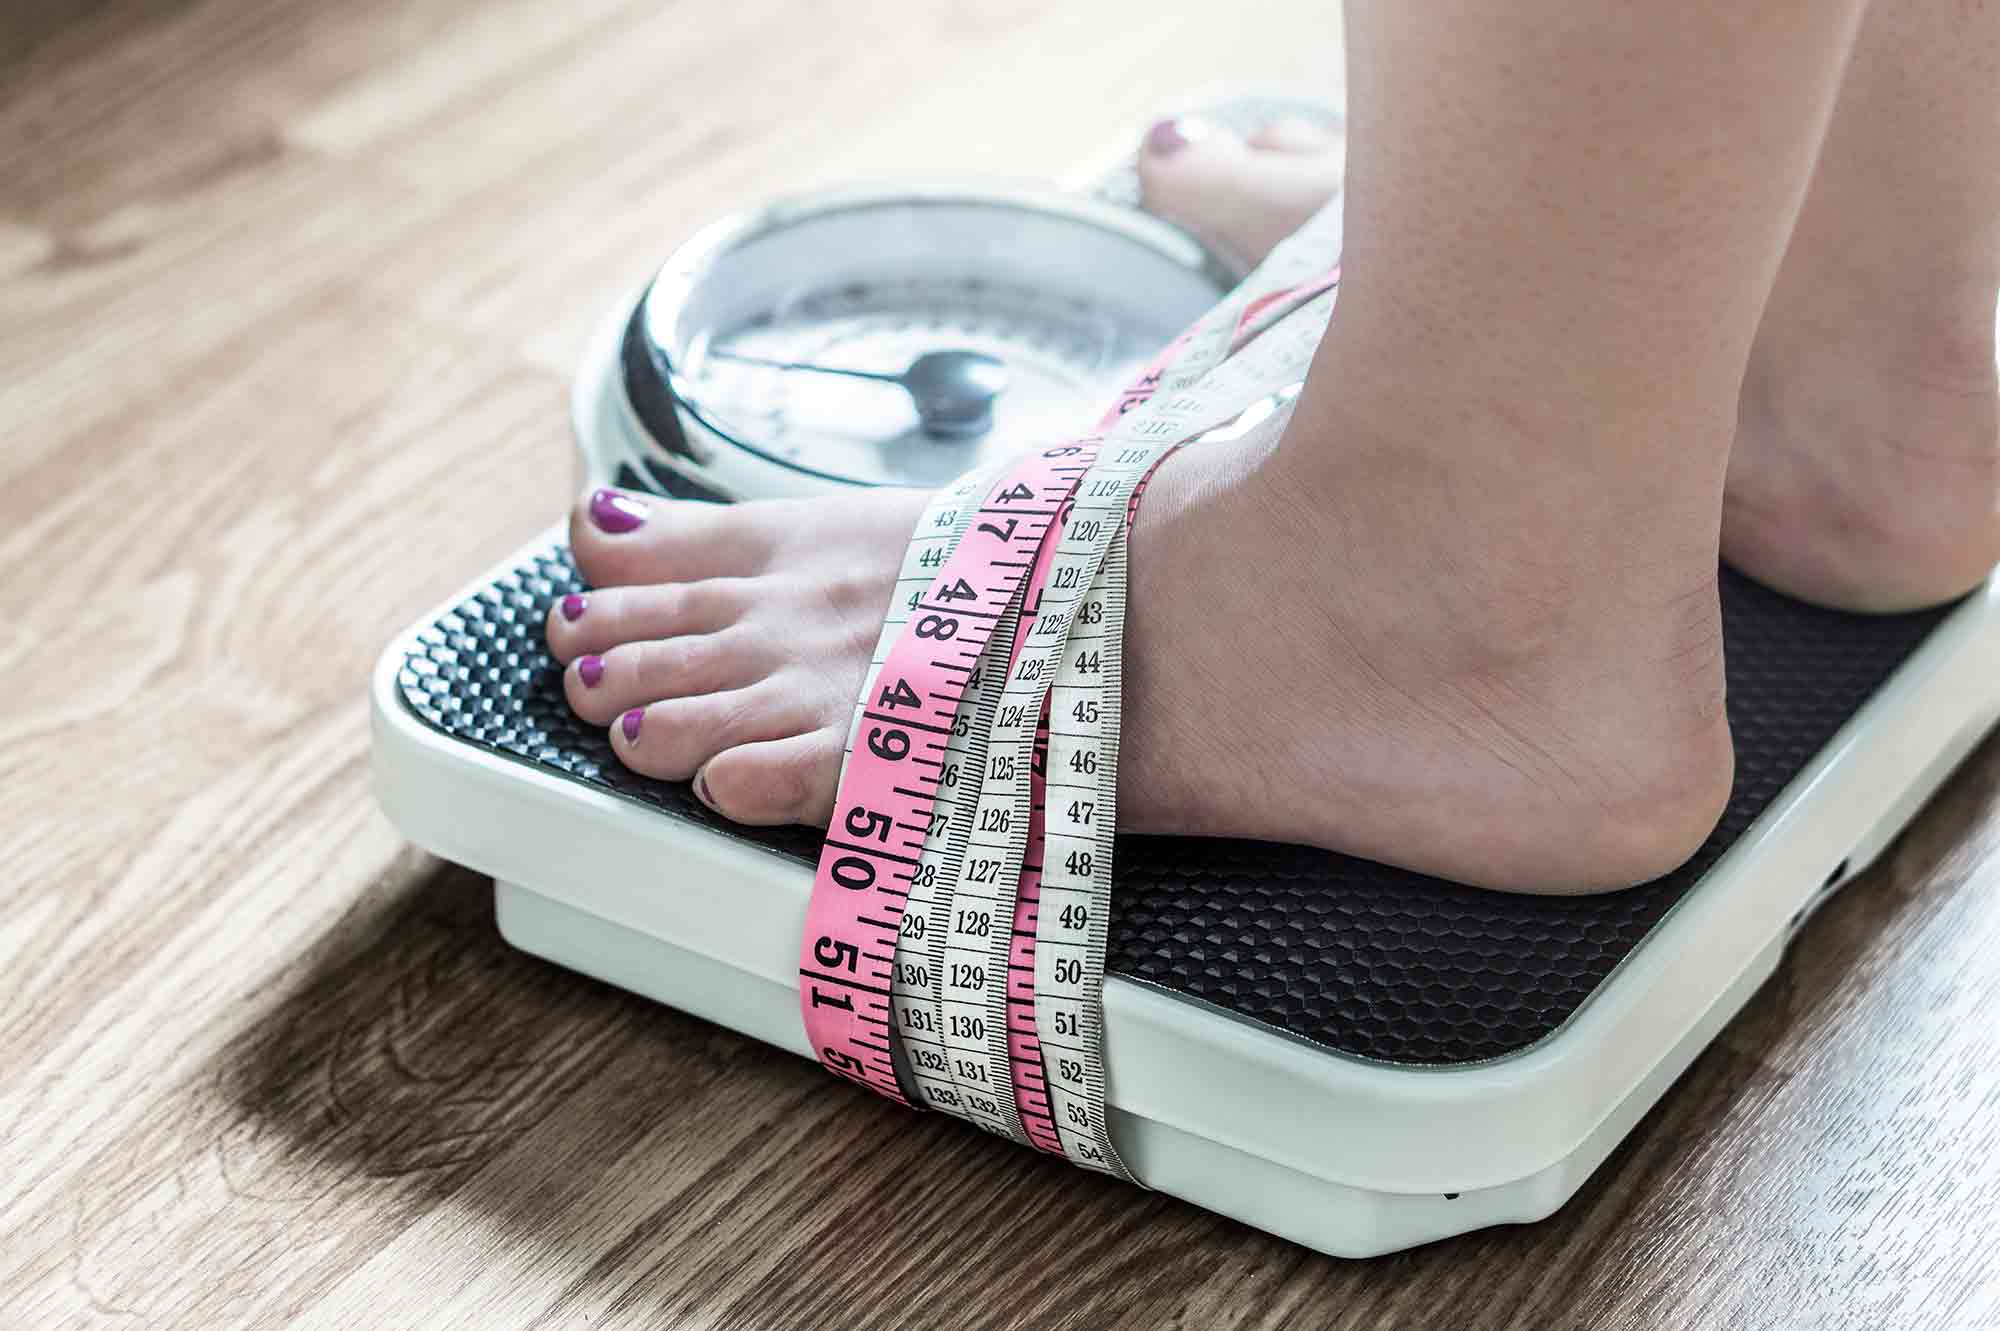 A dental organisation is calling on dental teams to spot signs of eating disorders over fears they could go undiagnosed